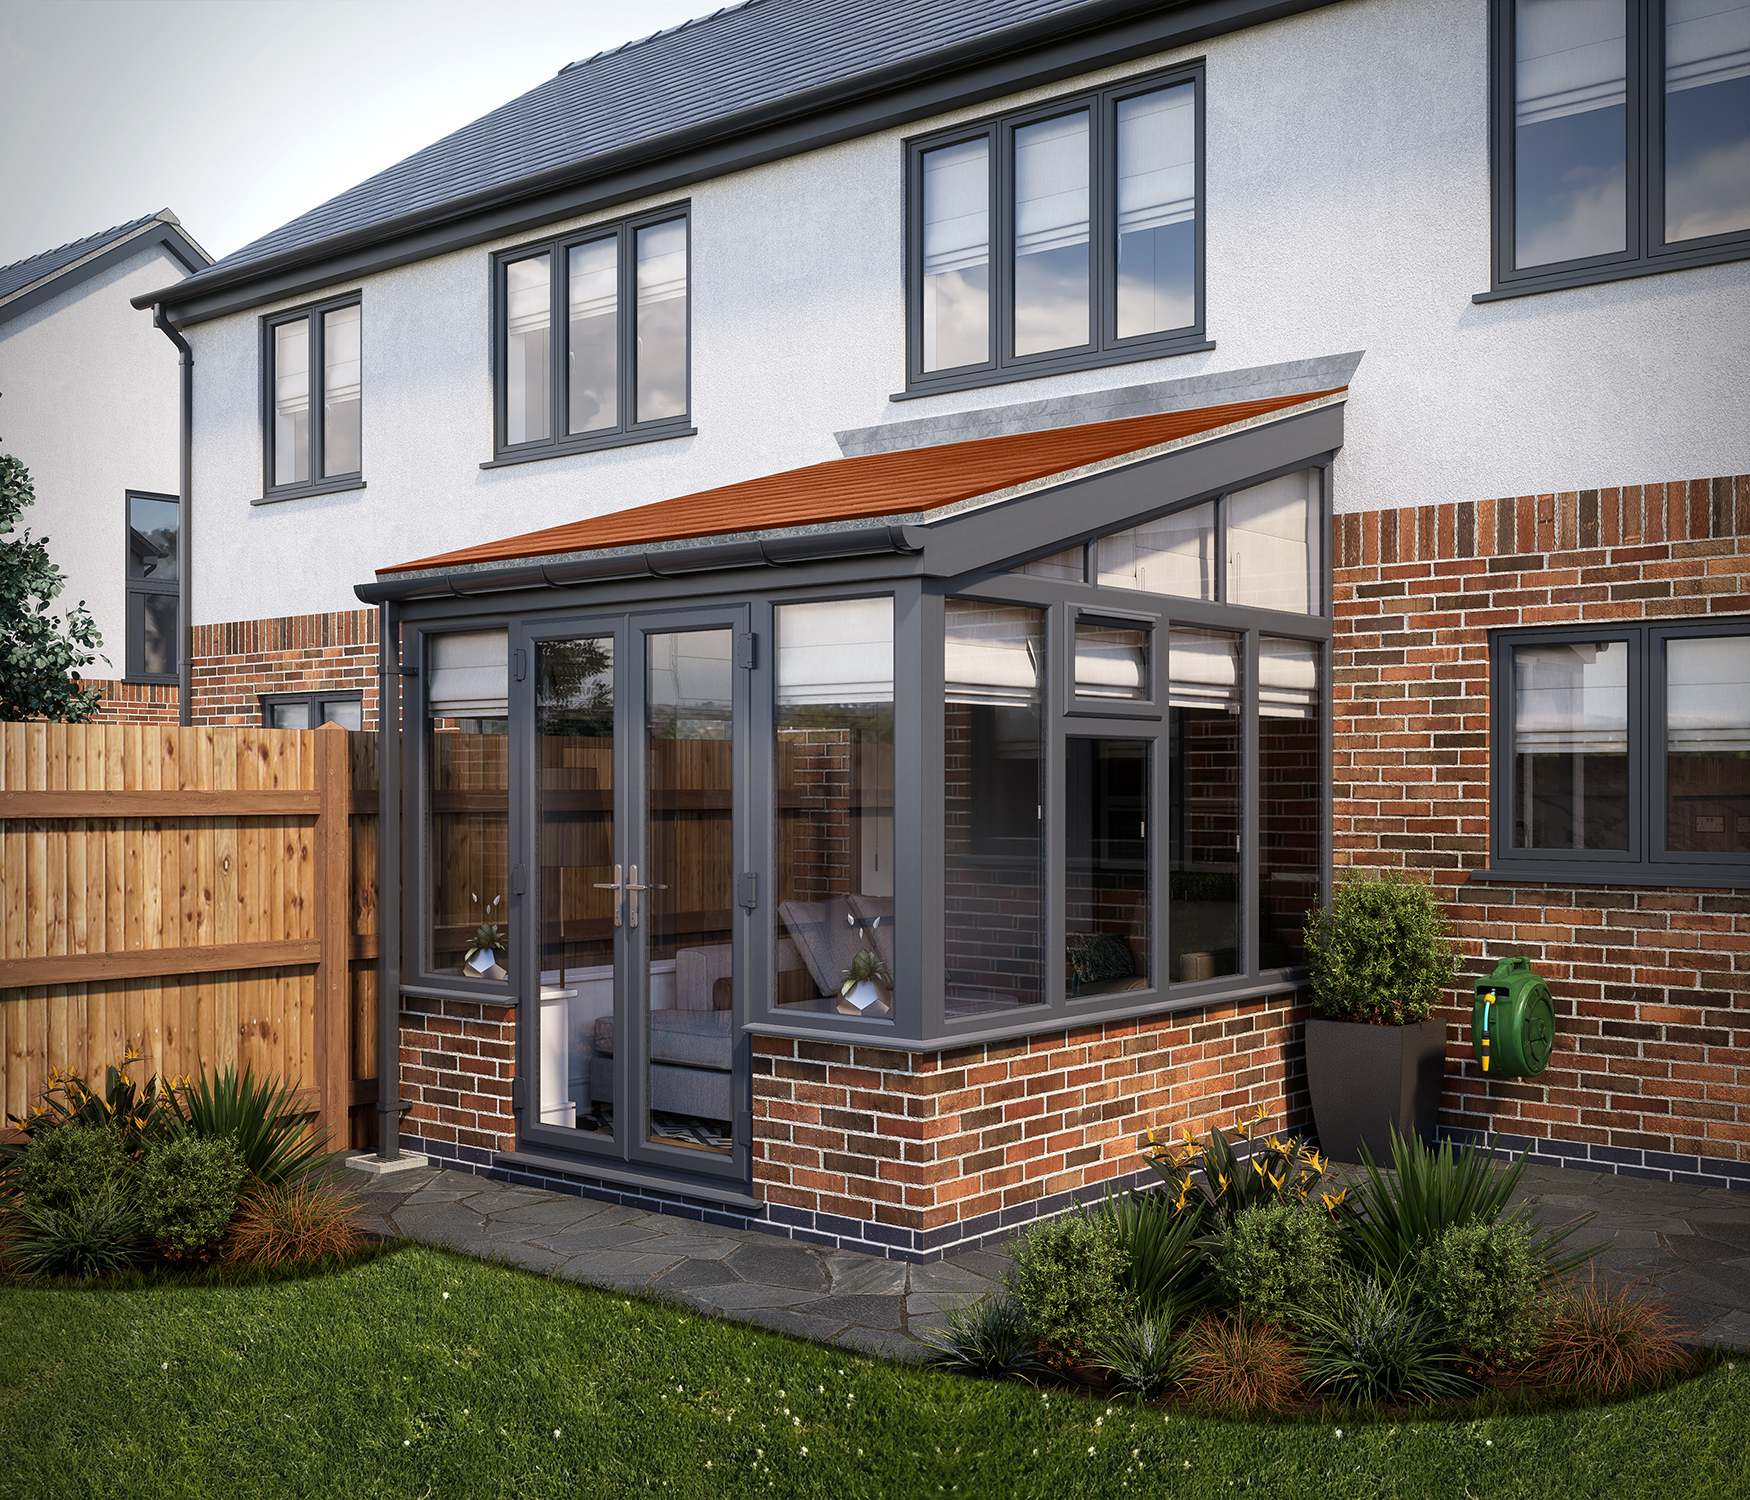 Image of SOLid Roof Lean to Conservatory Grey Frames Dwarf Wall with Rustic Terracotta Tiles - 10 x 10ft